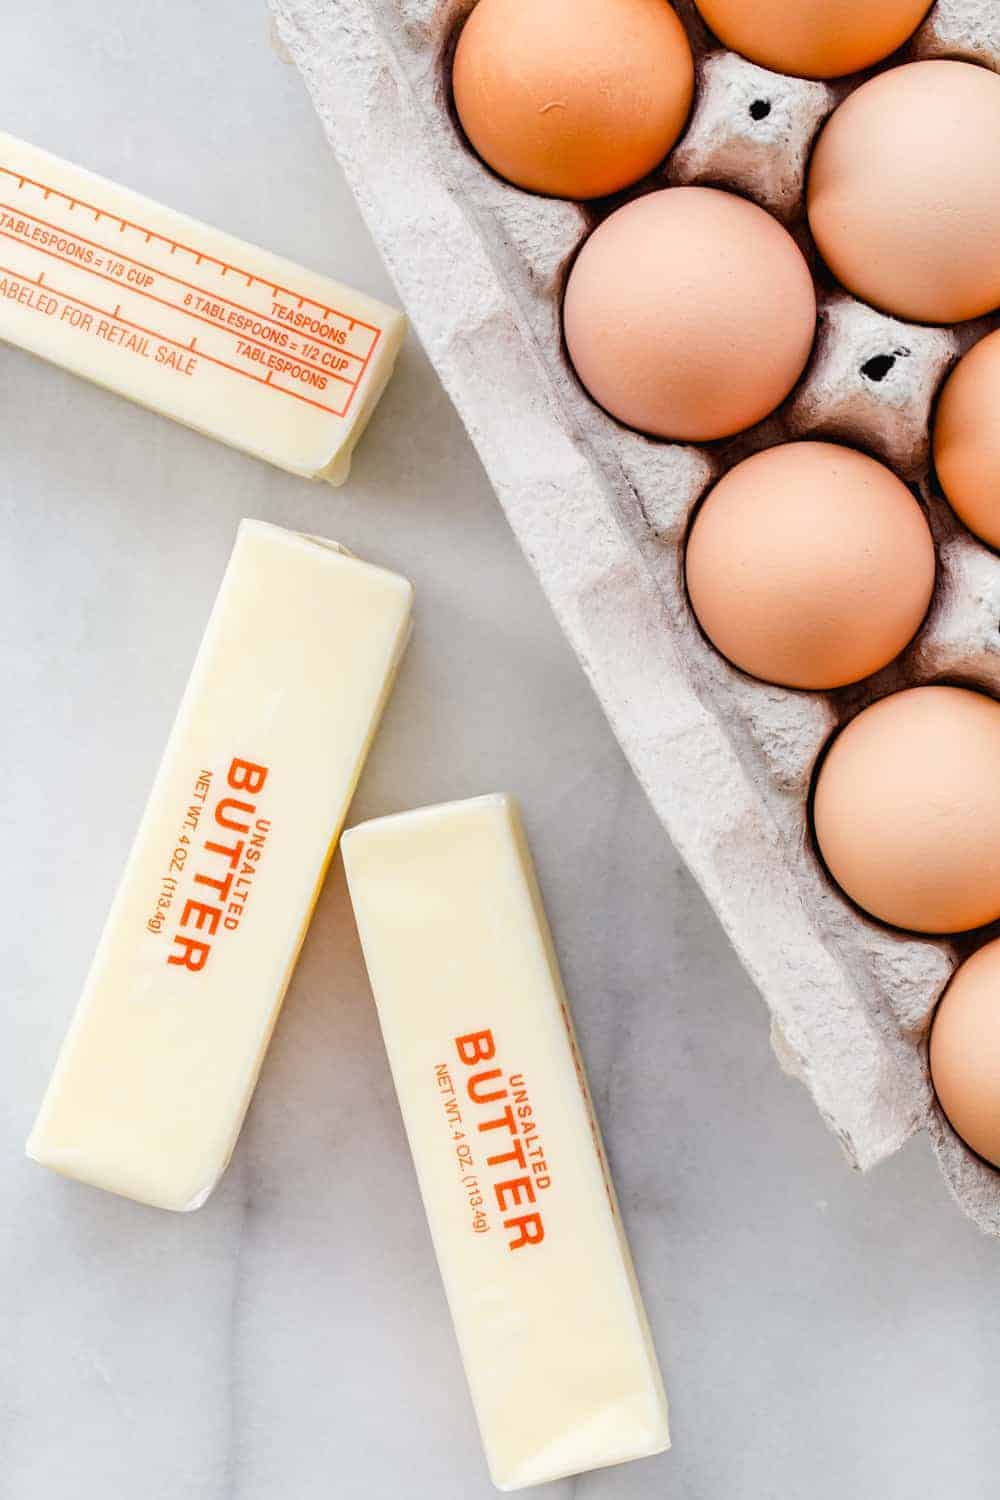 The Best Way To Soften Butter Quickly Without Melting It #butter